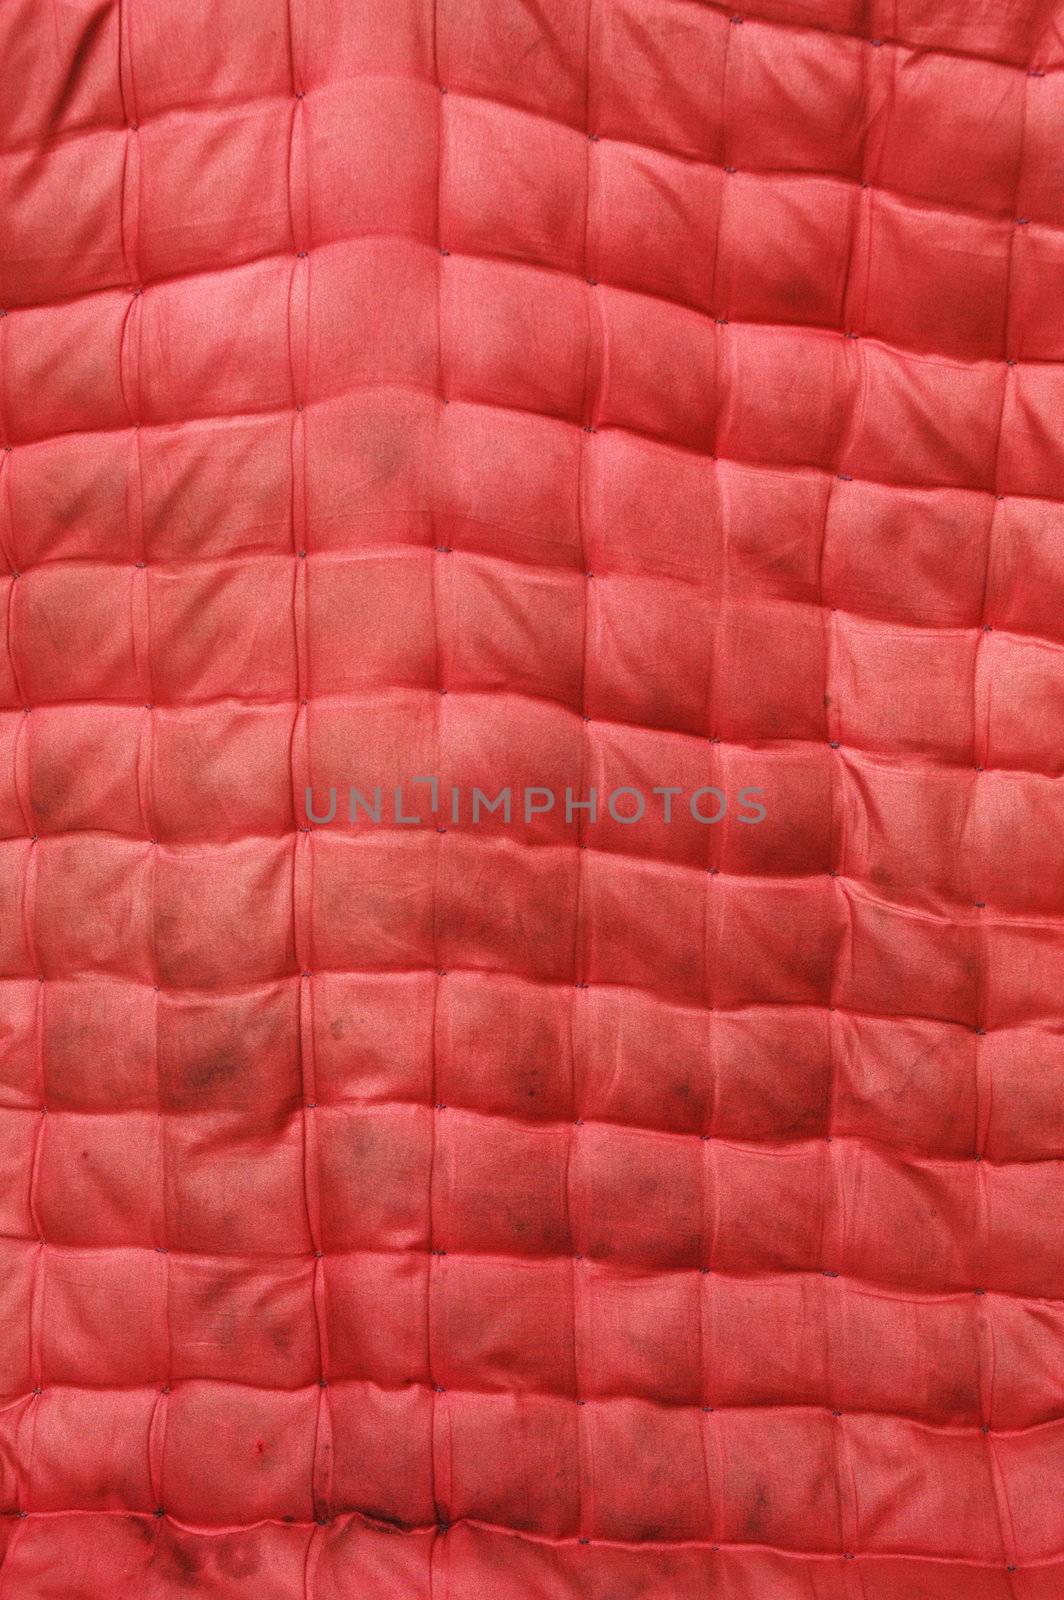 texture of the red old mattress